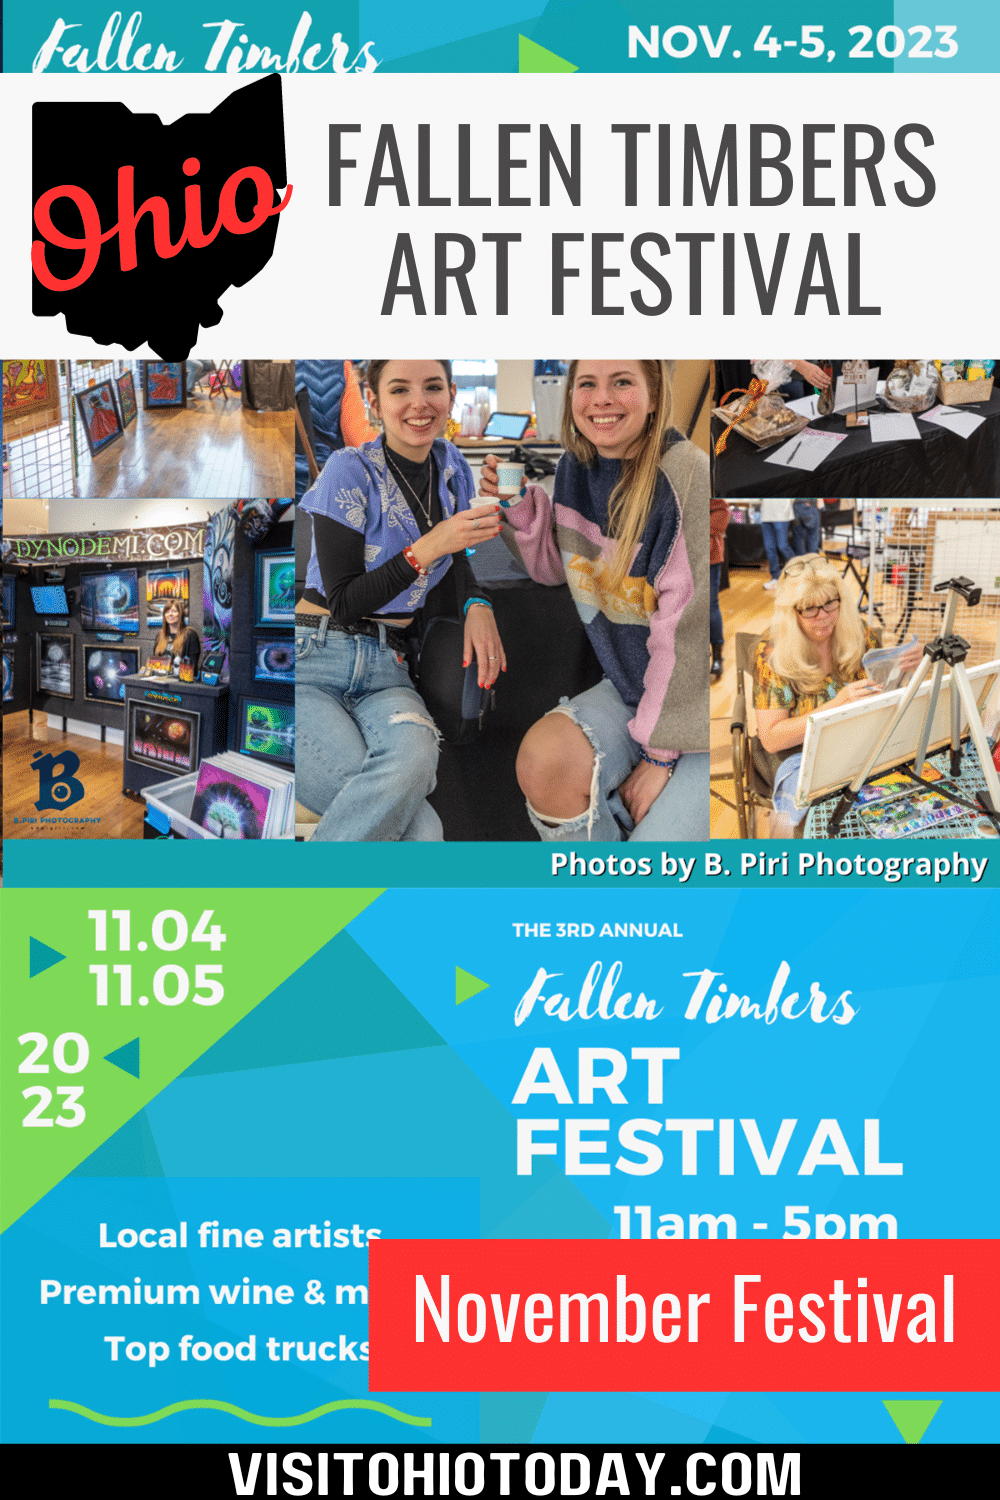 Fallen Timbers Art Festival is back for its third annual indoor fine arts show, taking place on Saturday, November 4 and Sunday, November 5, 2023 at The Shops at Fallen Timbers.